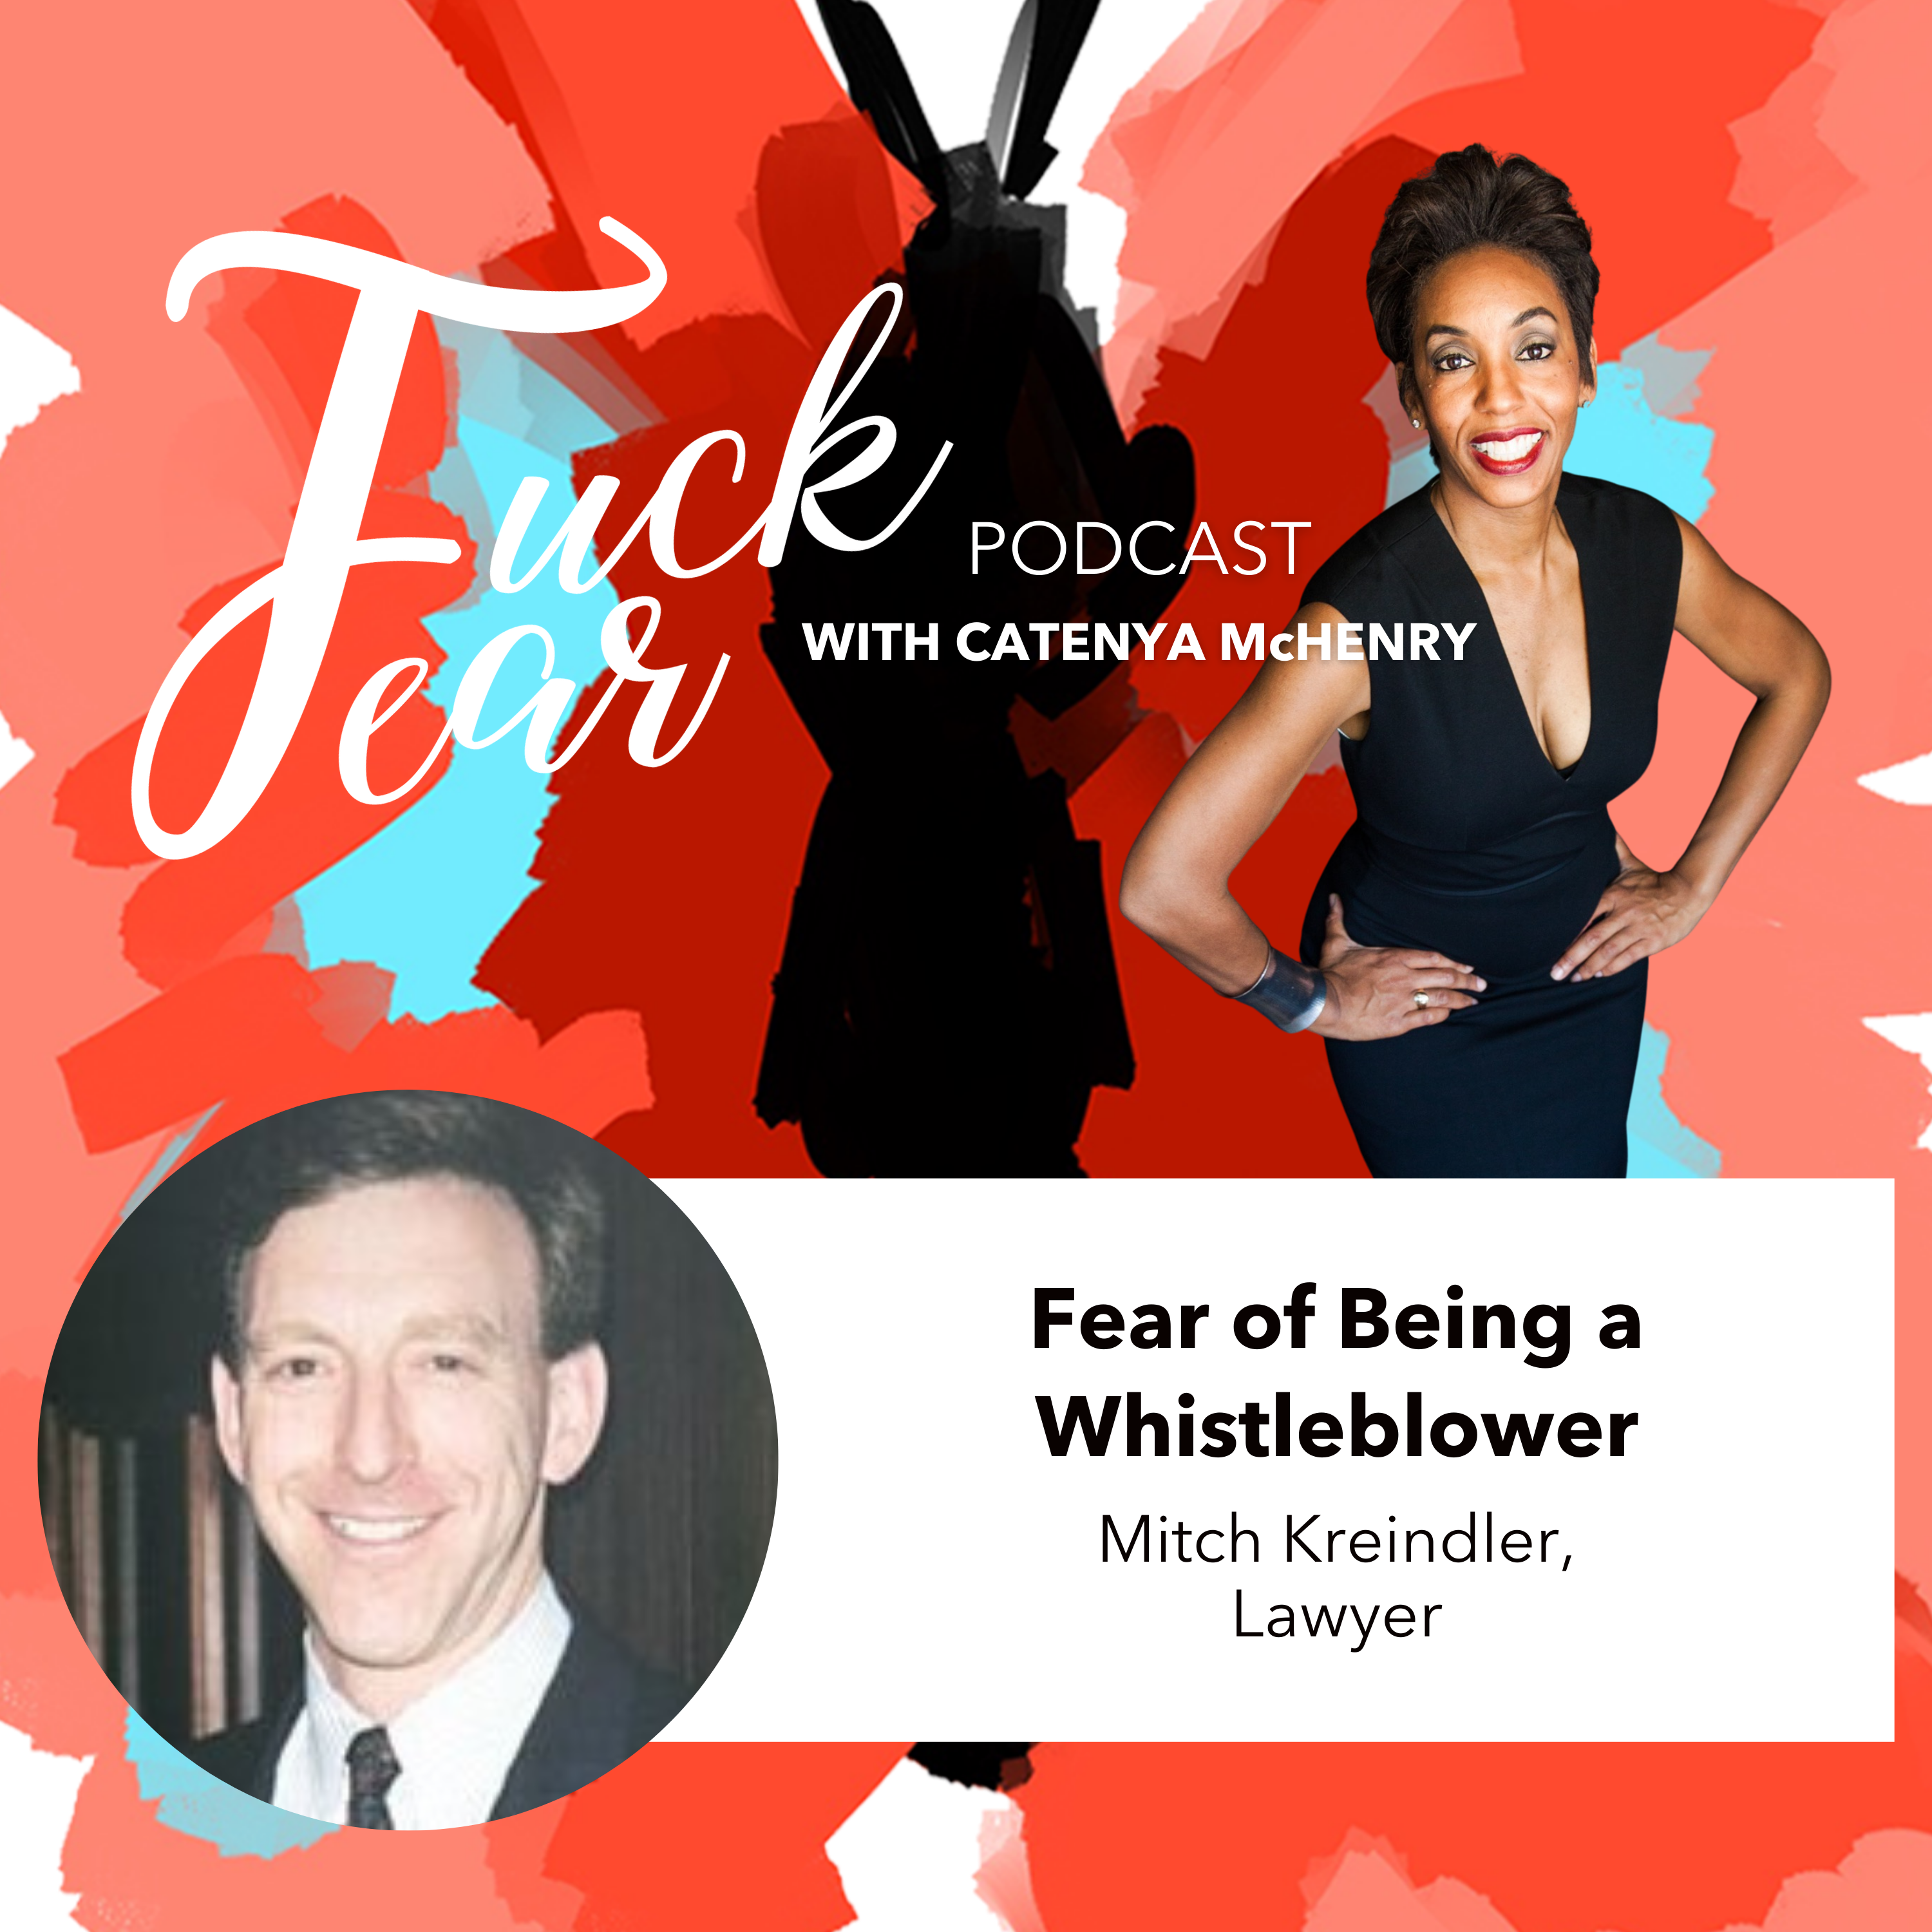 Podcast: Fear of Being a Whistleblower // Fxck Fear